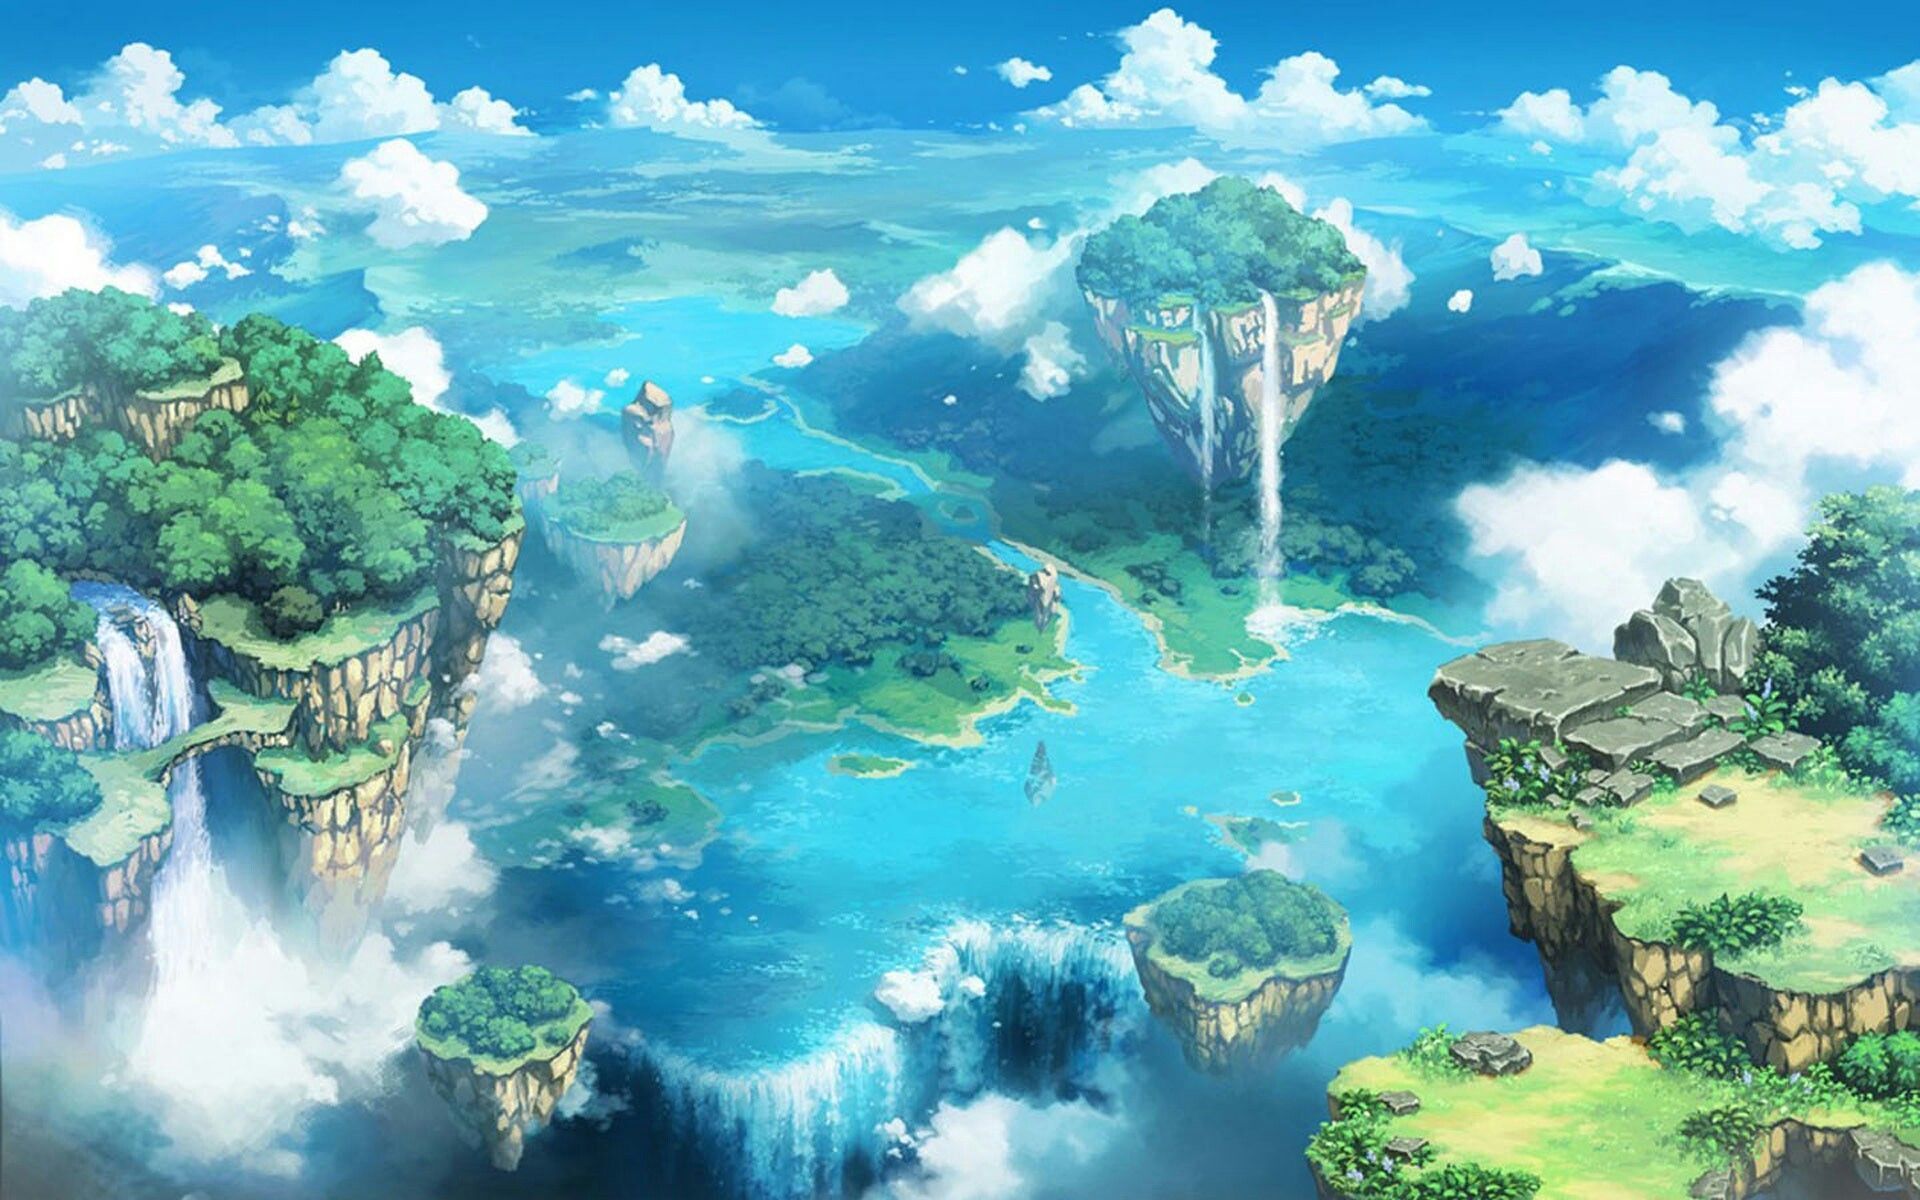 Anime wallpaper with waterfalls and trees - Nature, anime landscape